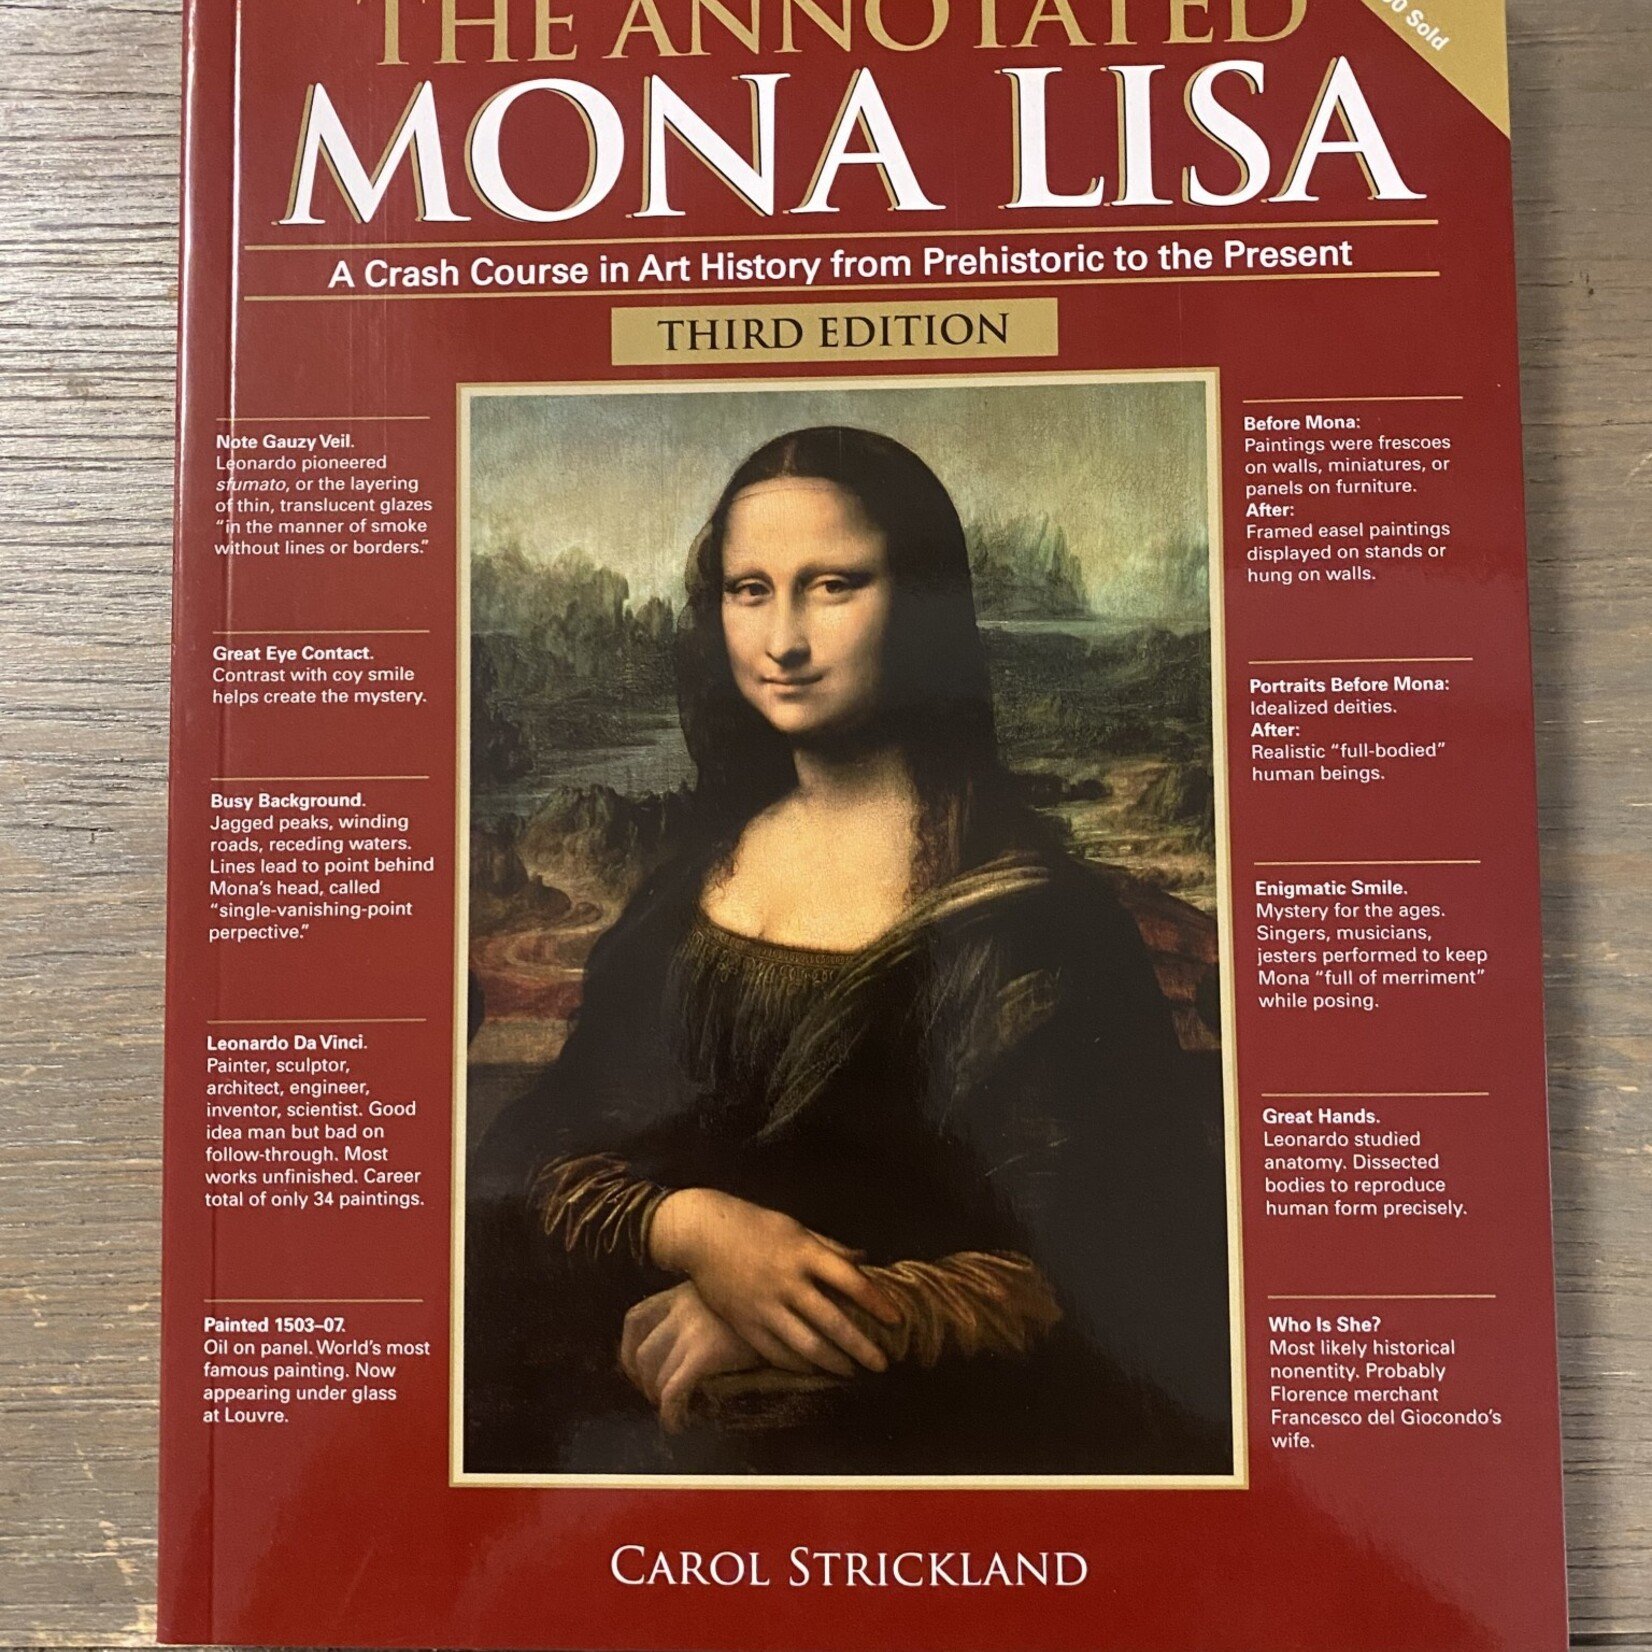 ANNOTATED MONA LISA: A CRASH COURSE IN ART HISTORY 3RD ED USED